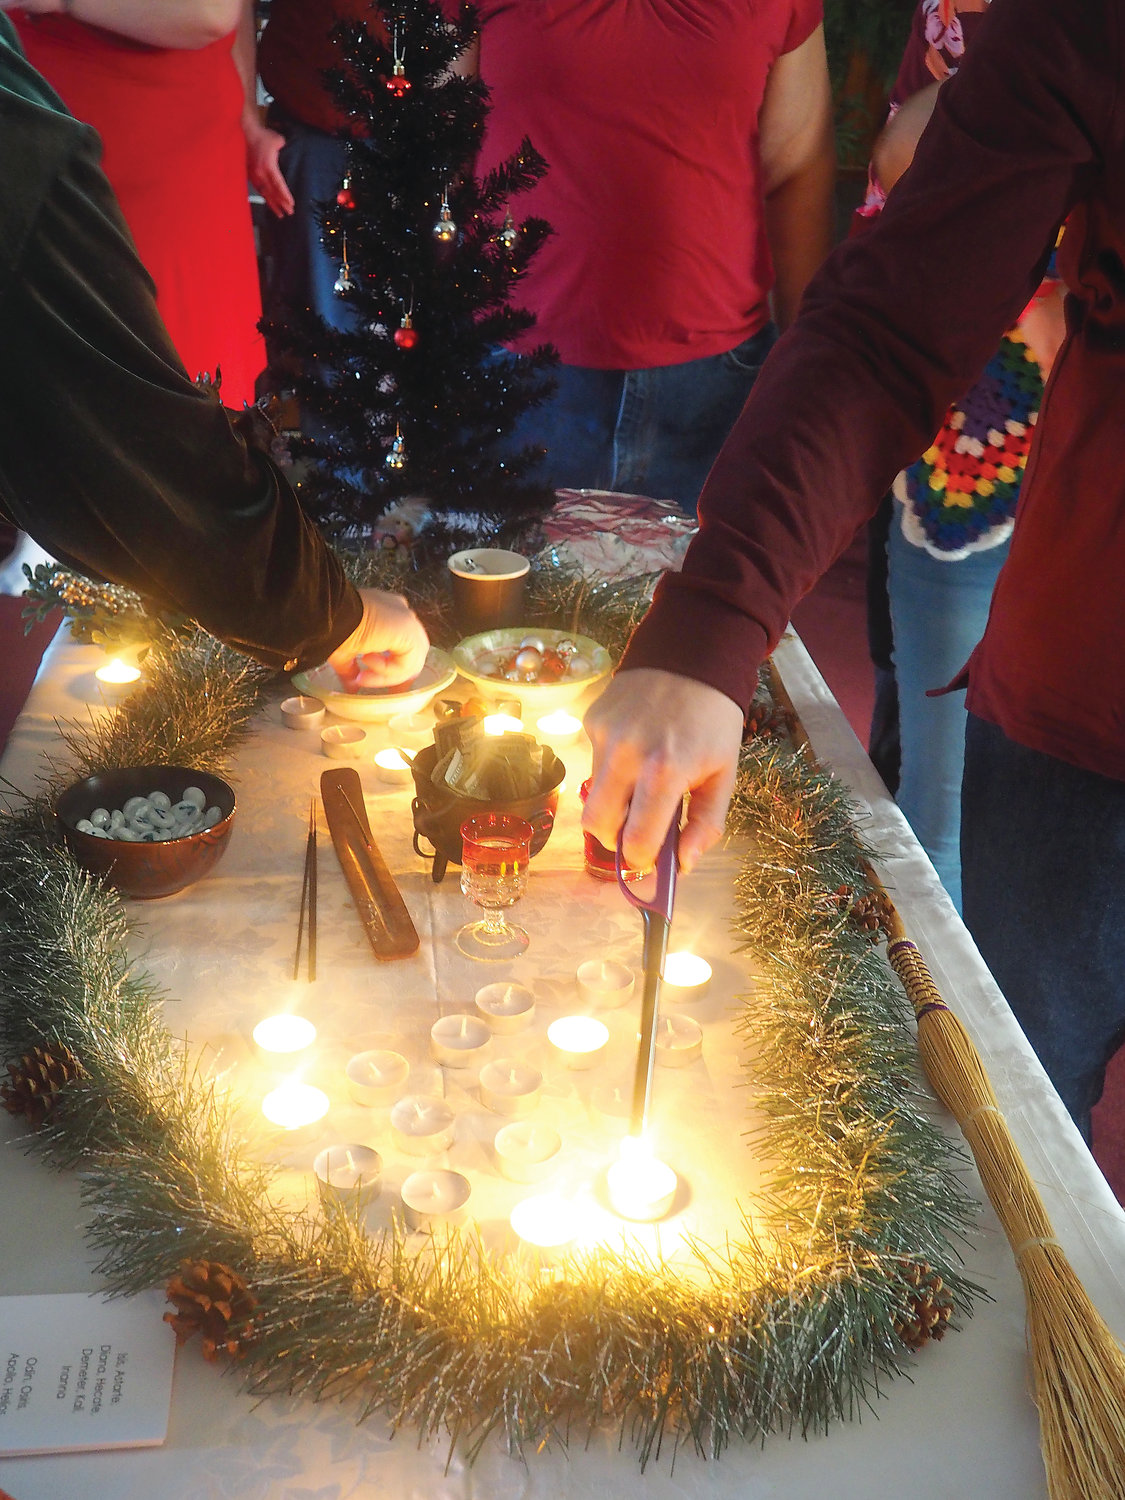 Churchgoers light a candle on the shrine, a practice calling for reflection on the past year.